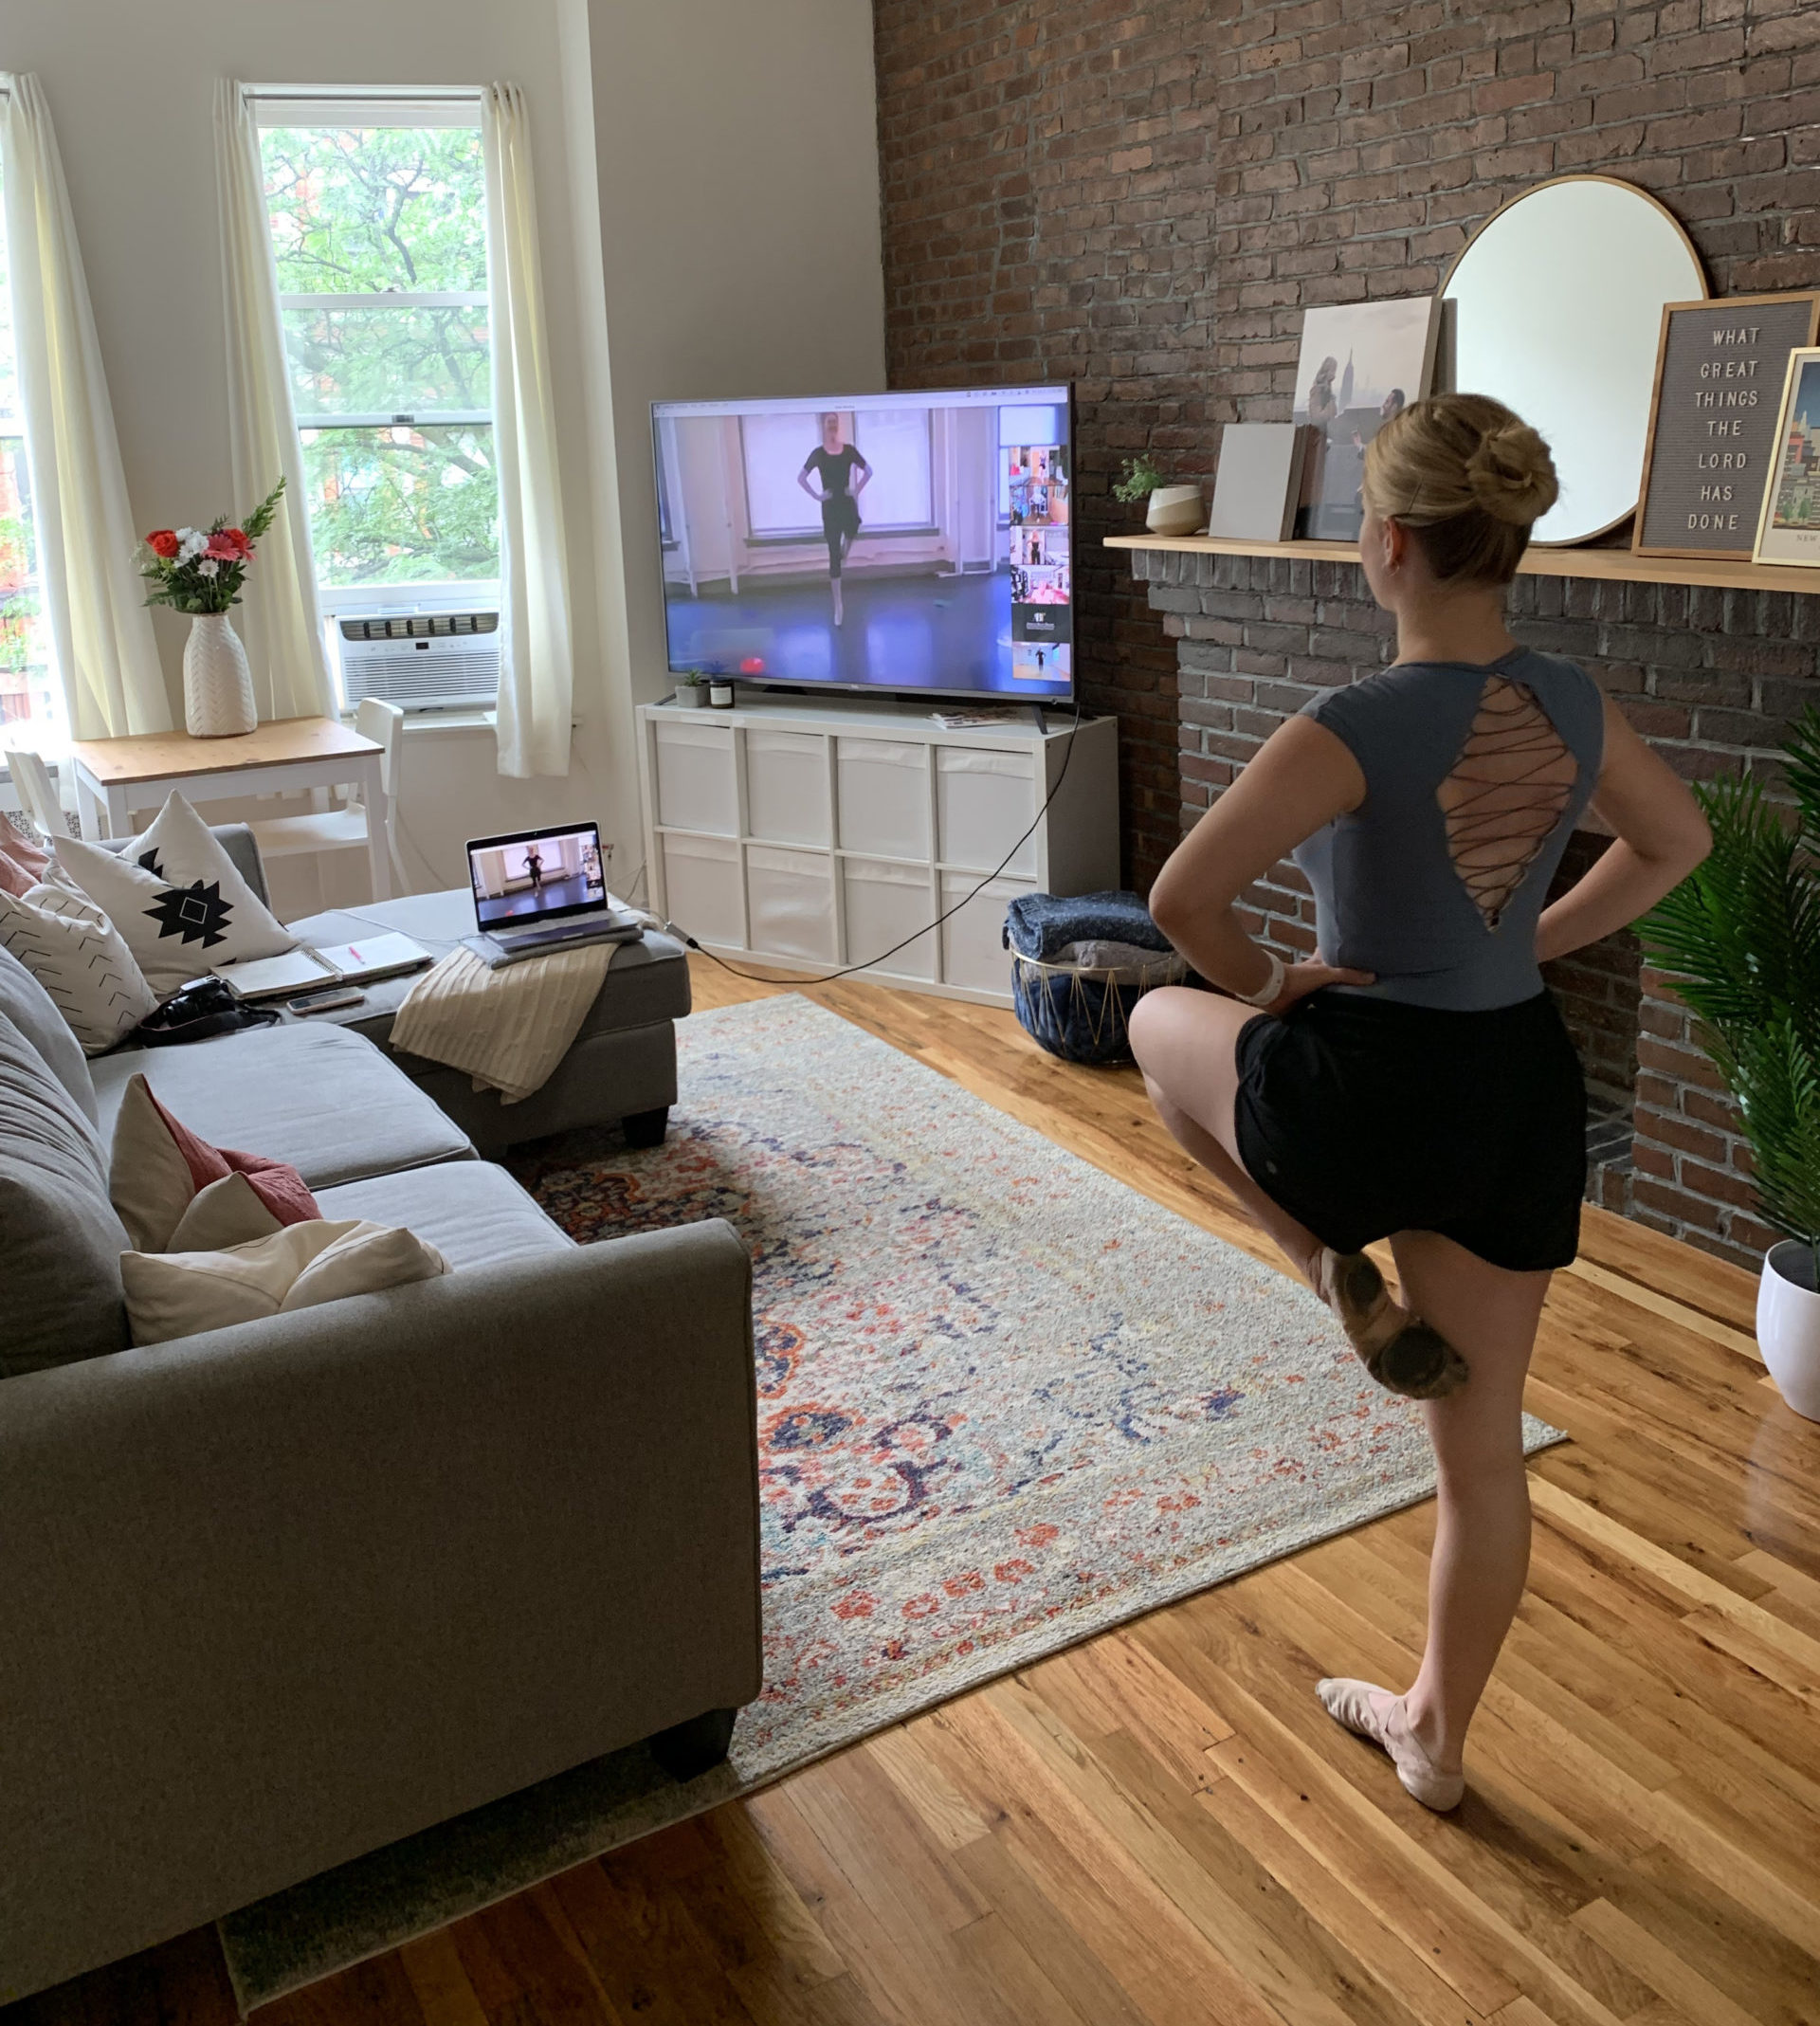 Haley Hilton takes a ballet class from her living room. She balances in passe, hands on hips, looking at her television where her teacher is on Zoom.